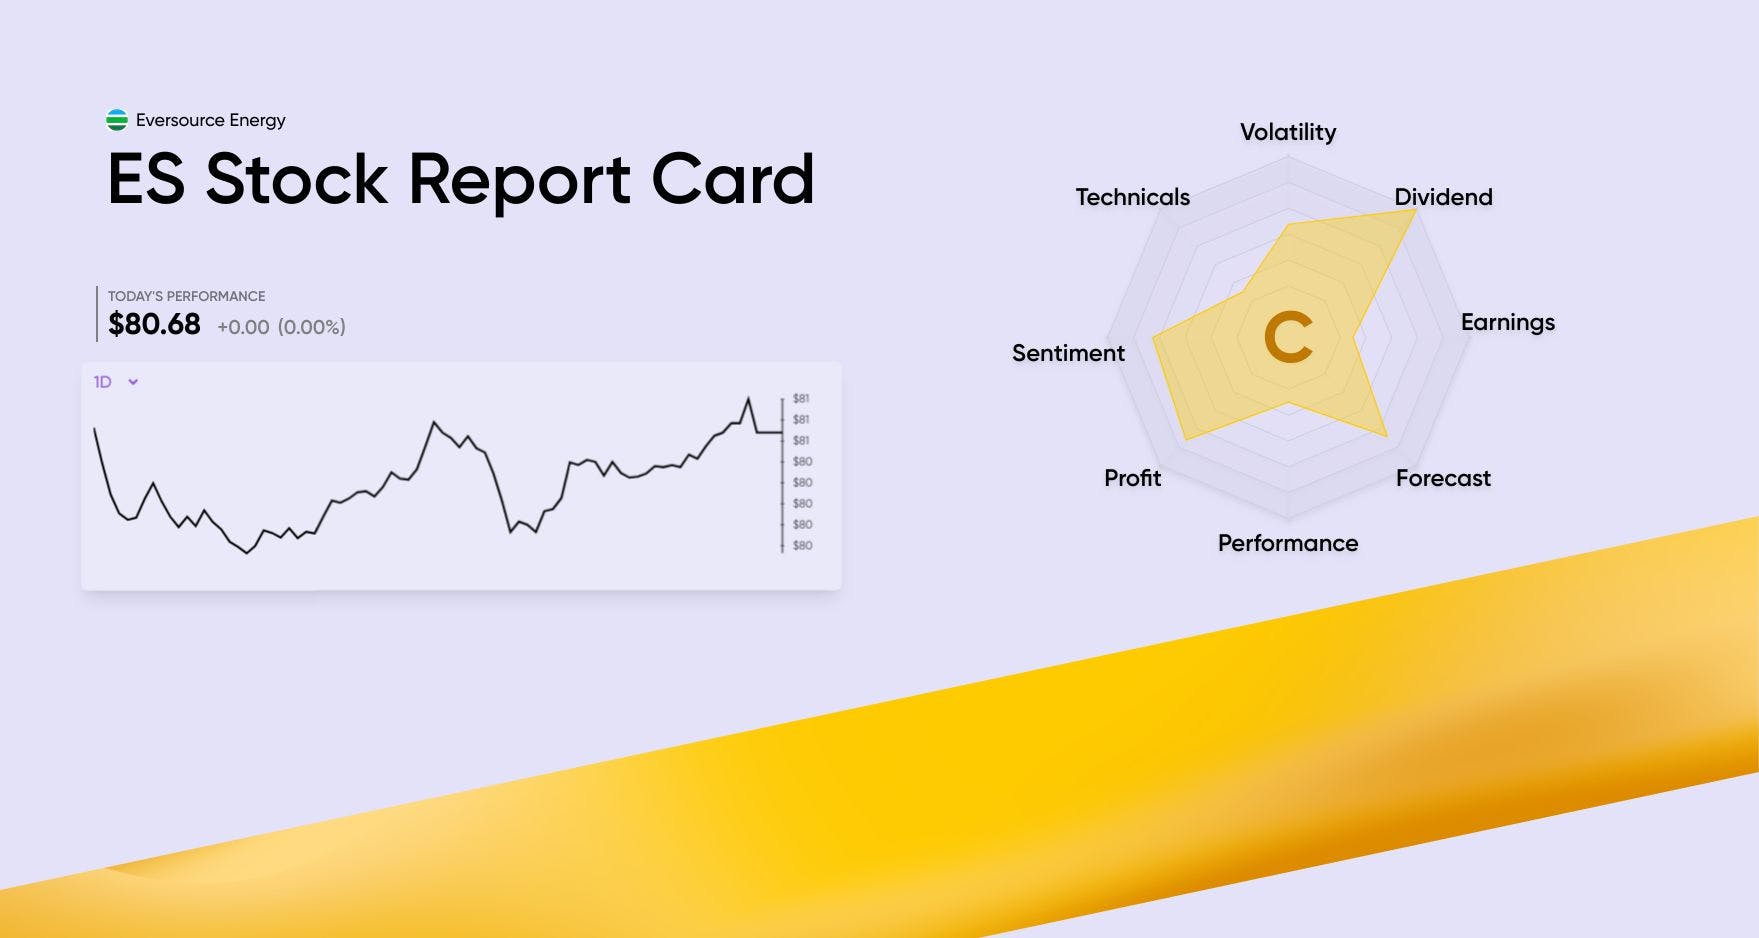 reportcard summary for Eversource Energy